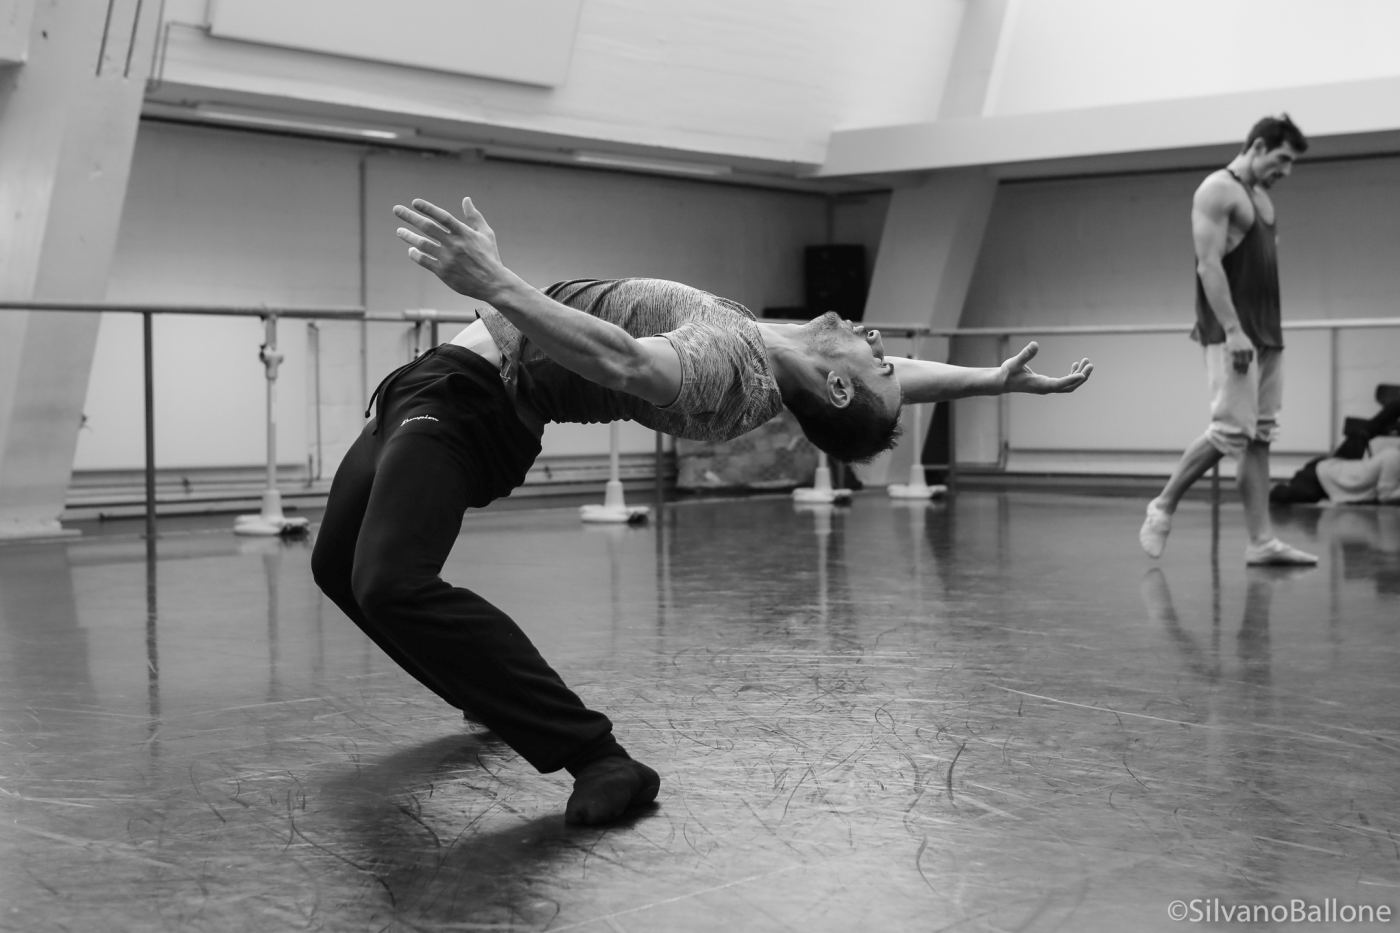 4. T.Mikayelyan and V.Martirosyan, rehearsal 2019, Forceful Feelings © S.Ballone